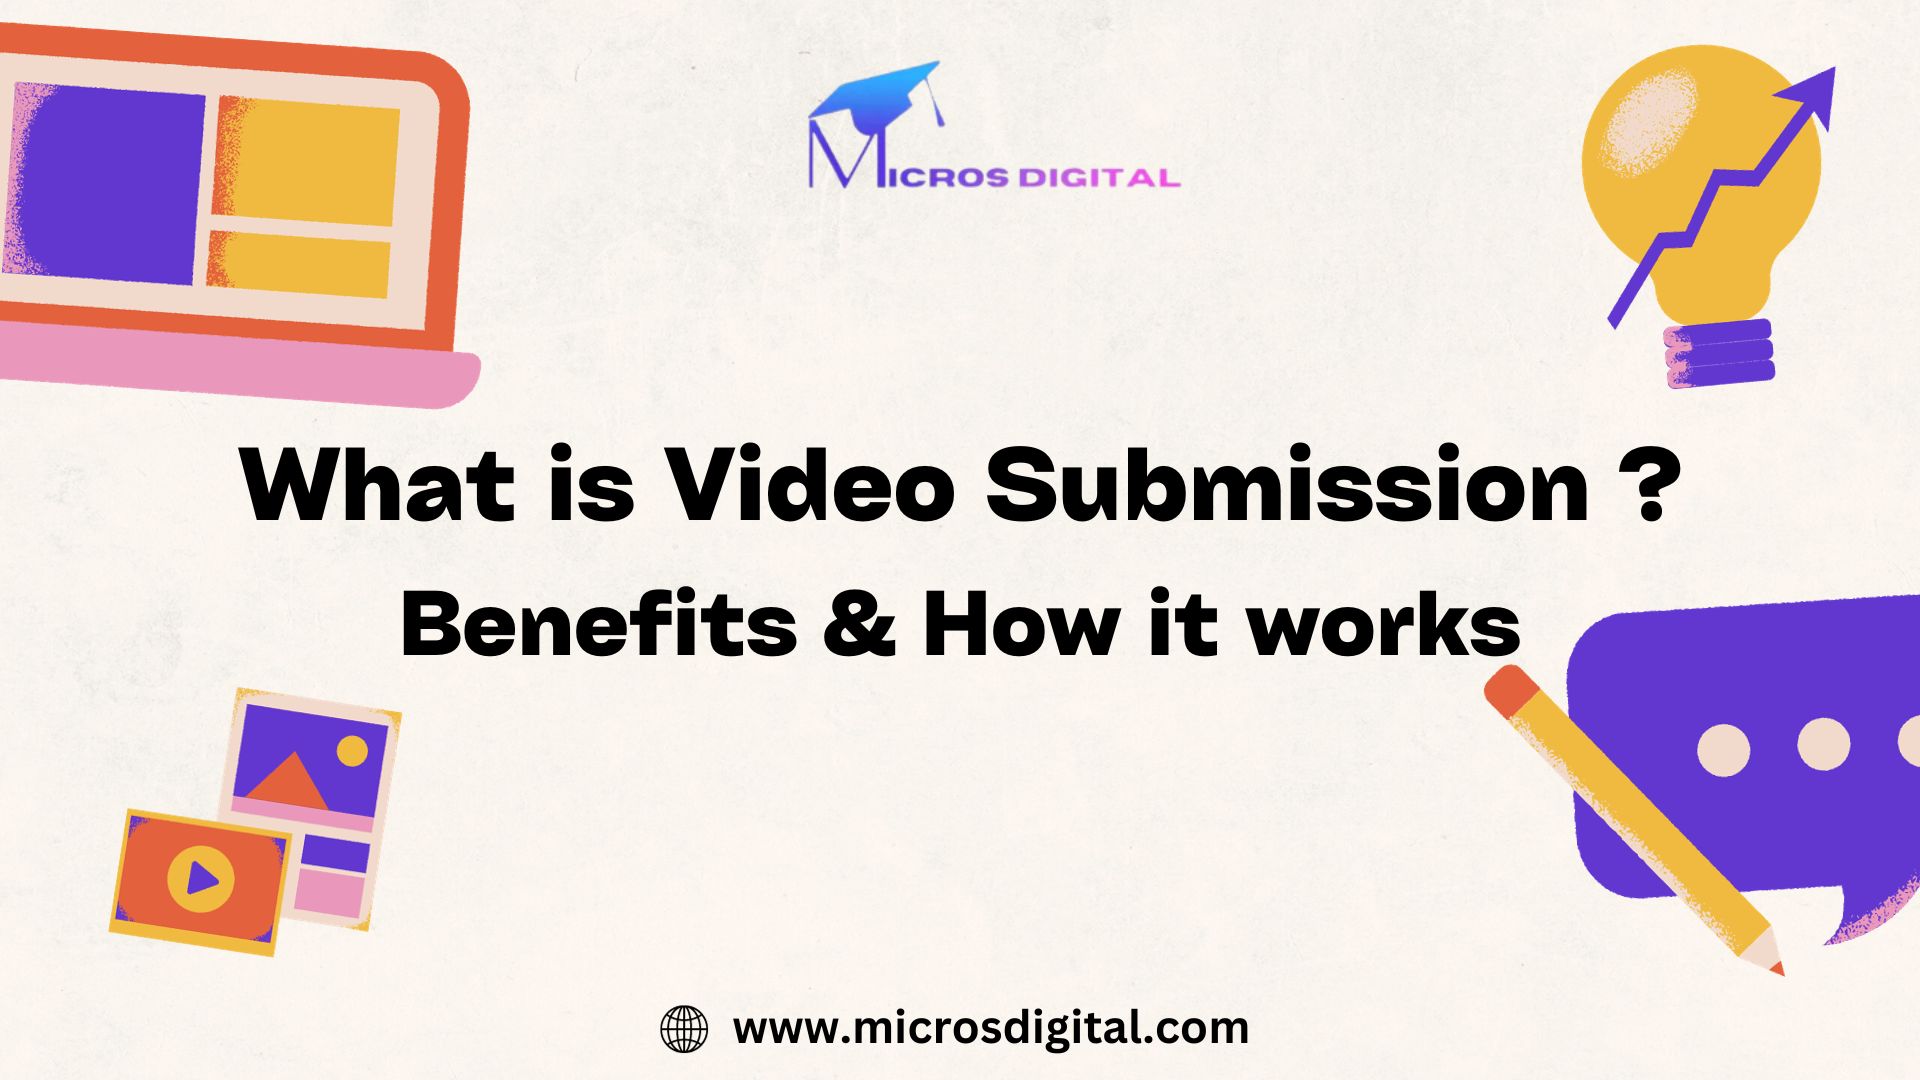 What is Video Submission